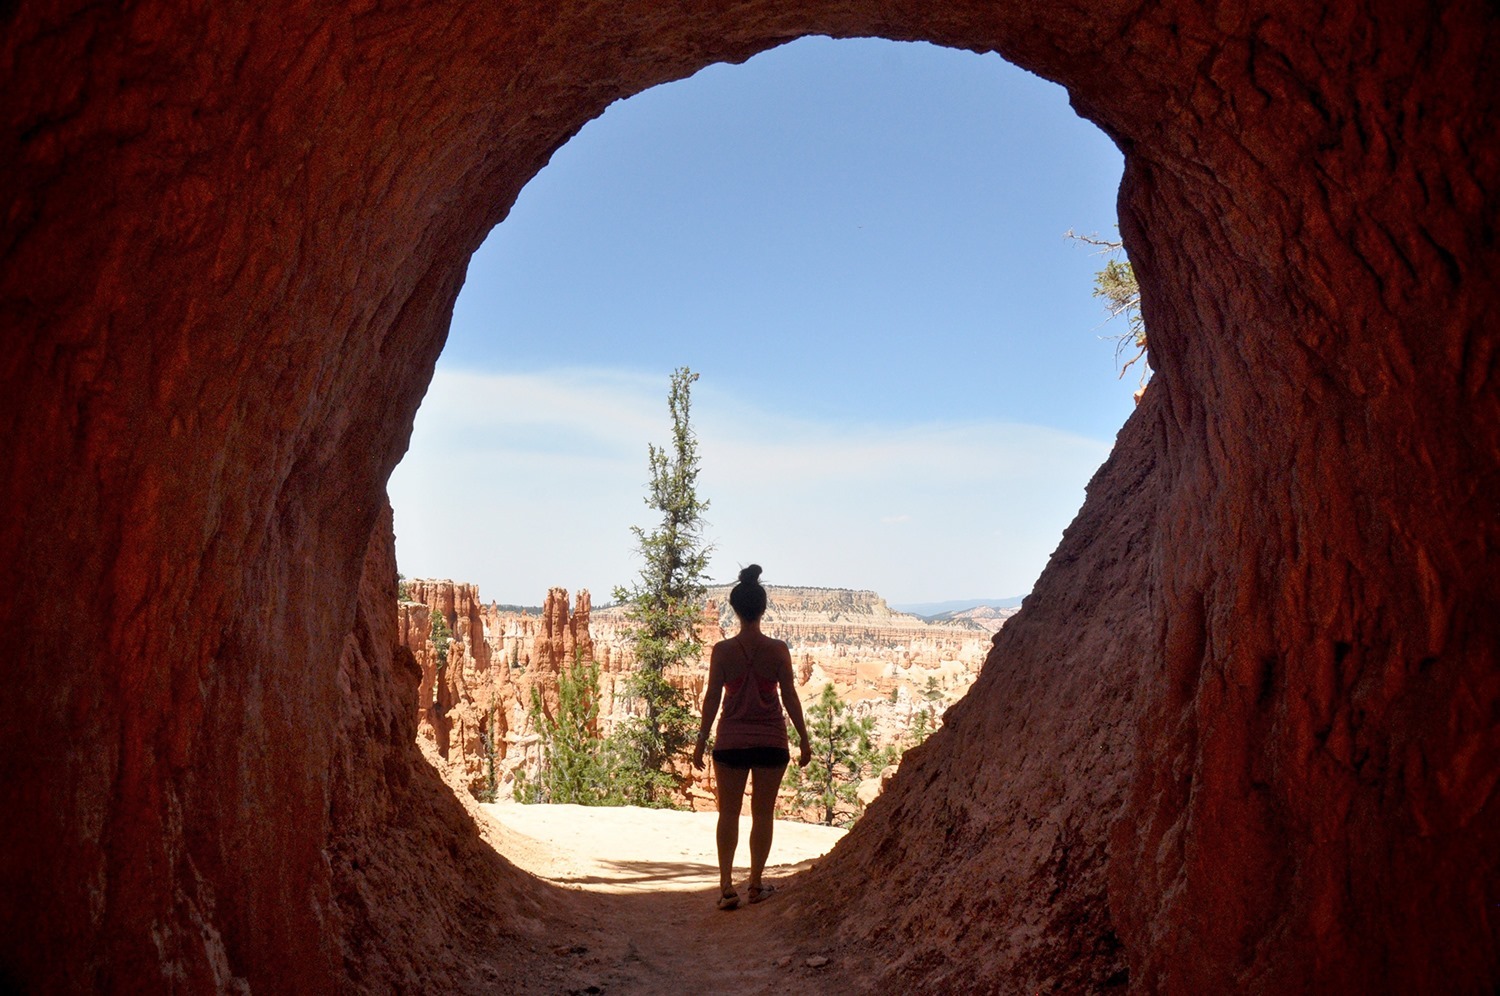 Bryce Canyon National Park: Plan the Perfect Trip